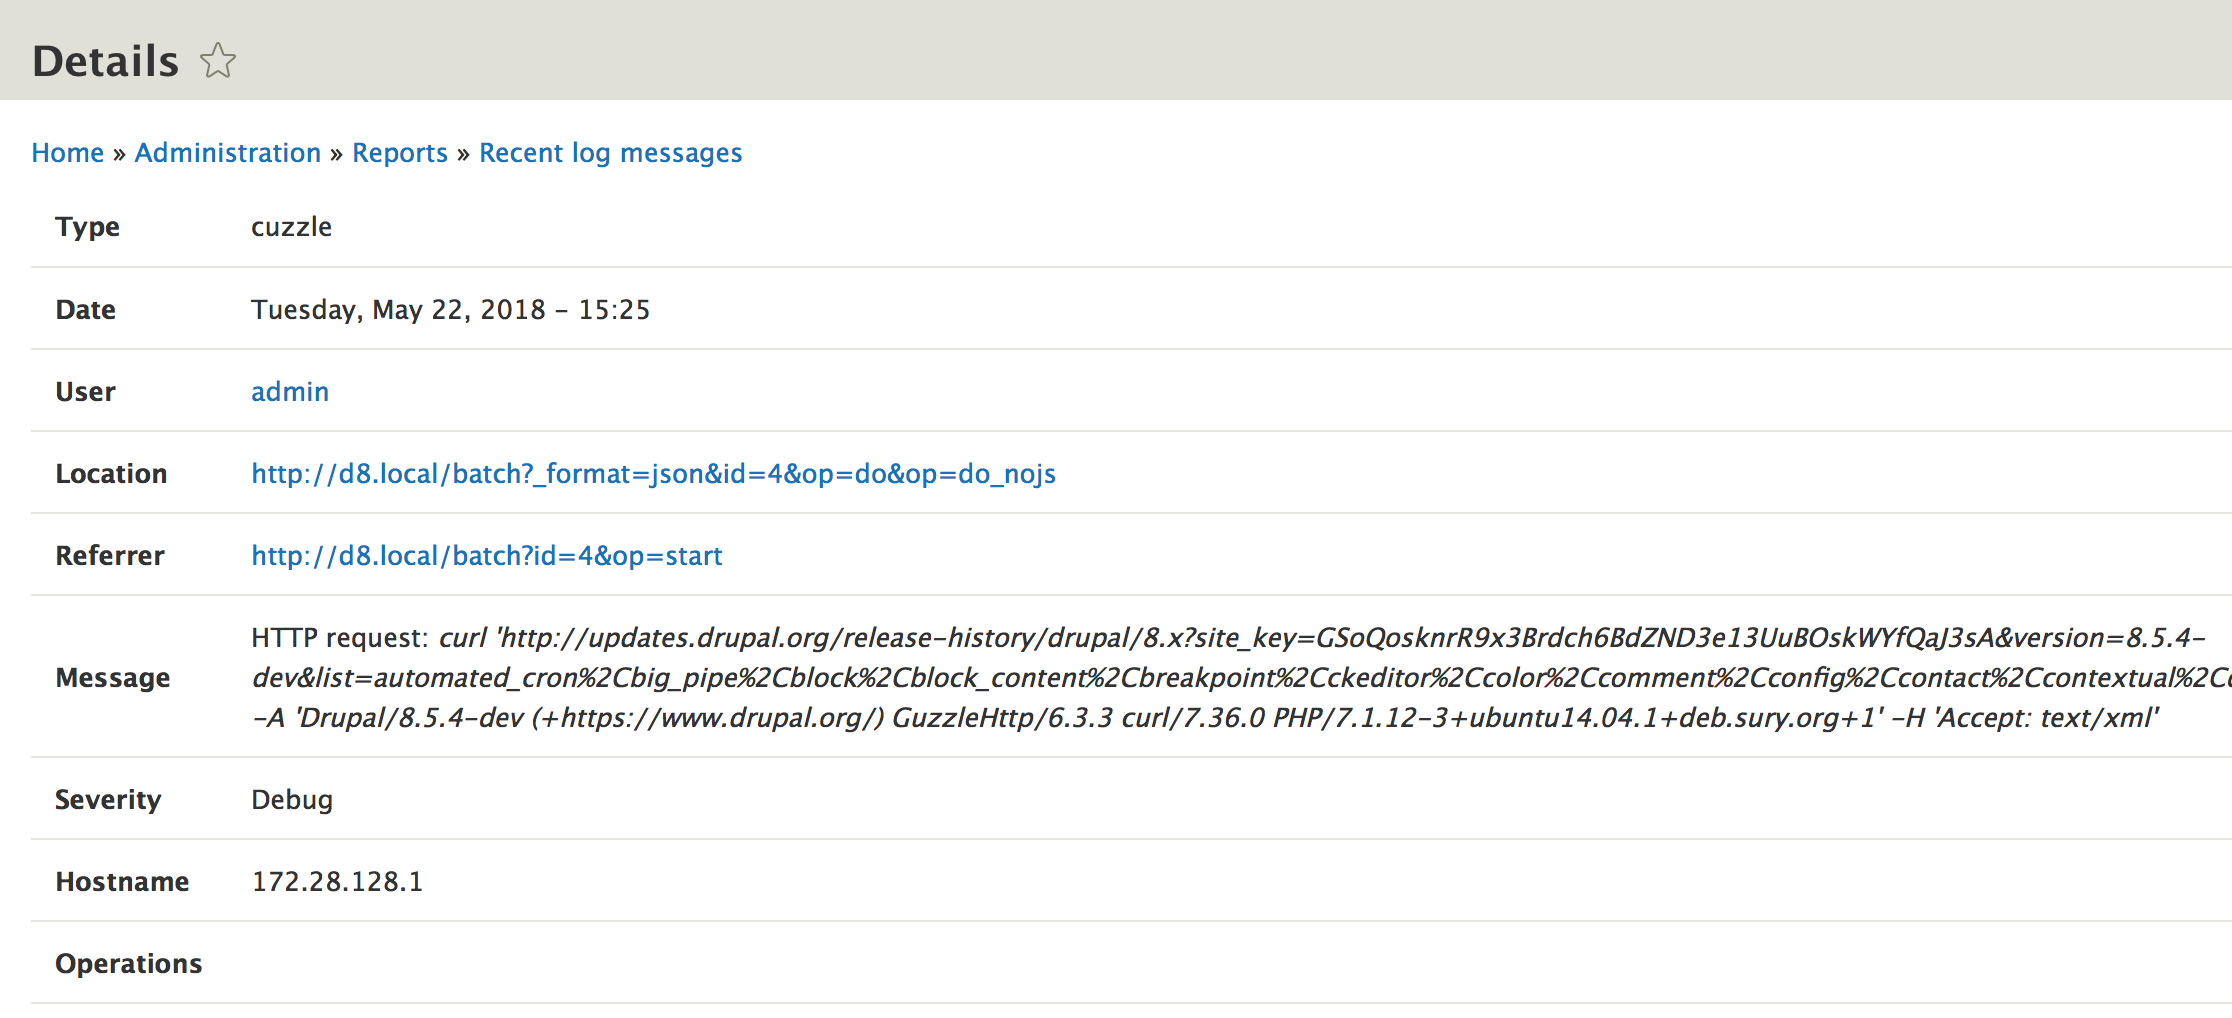 Example log message from the database log